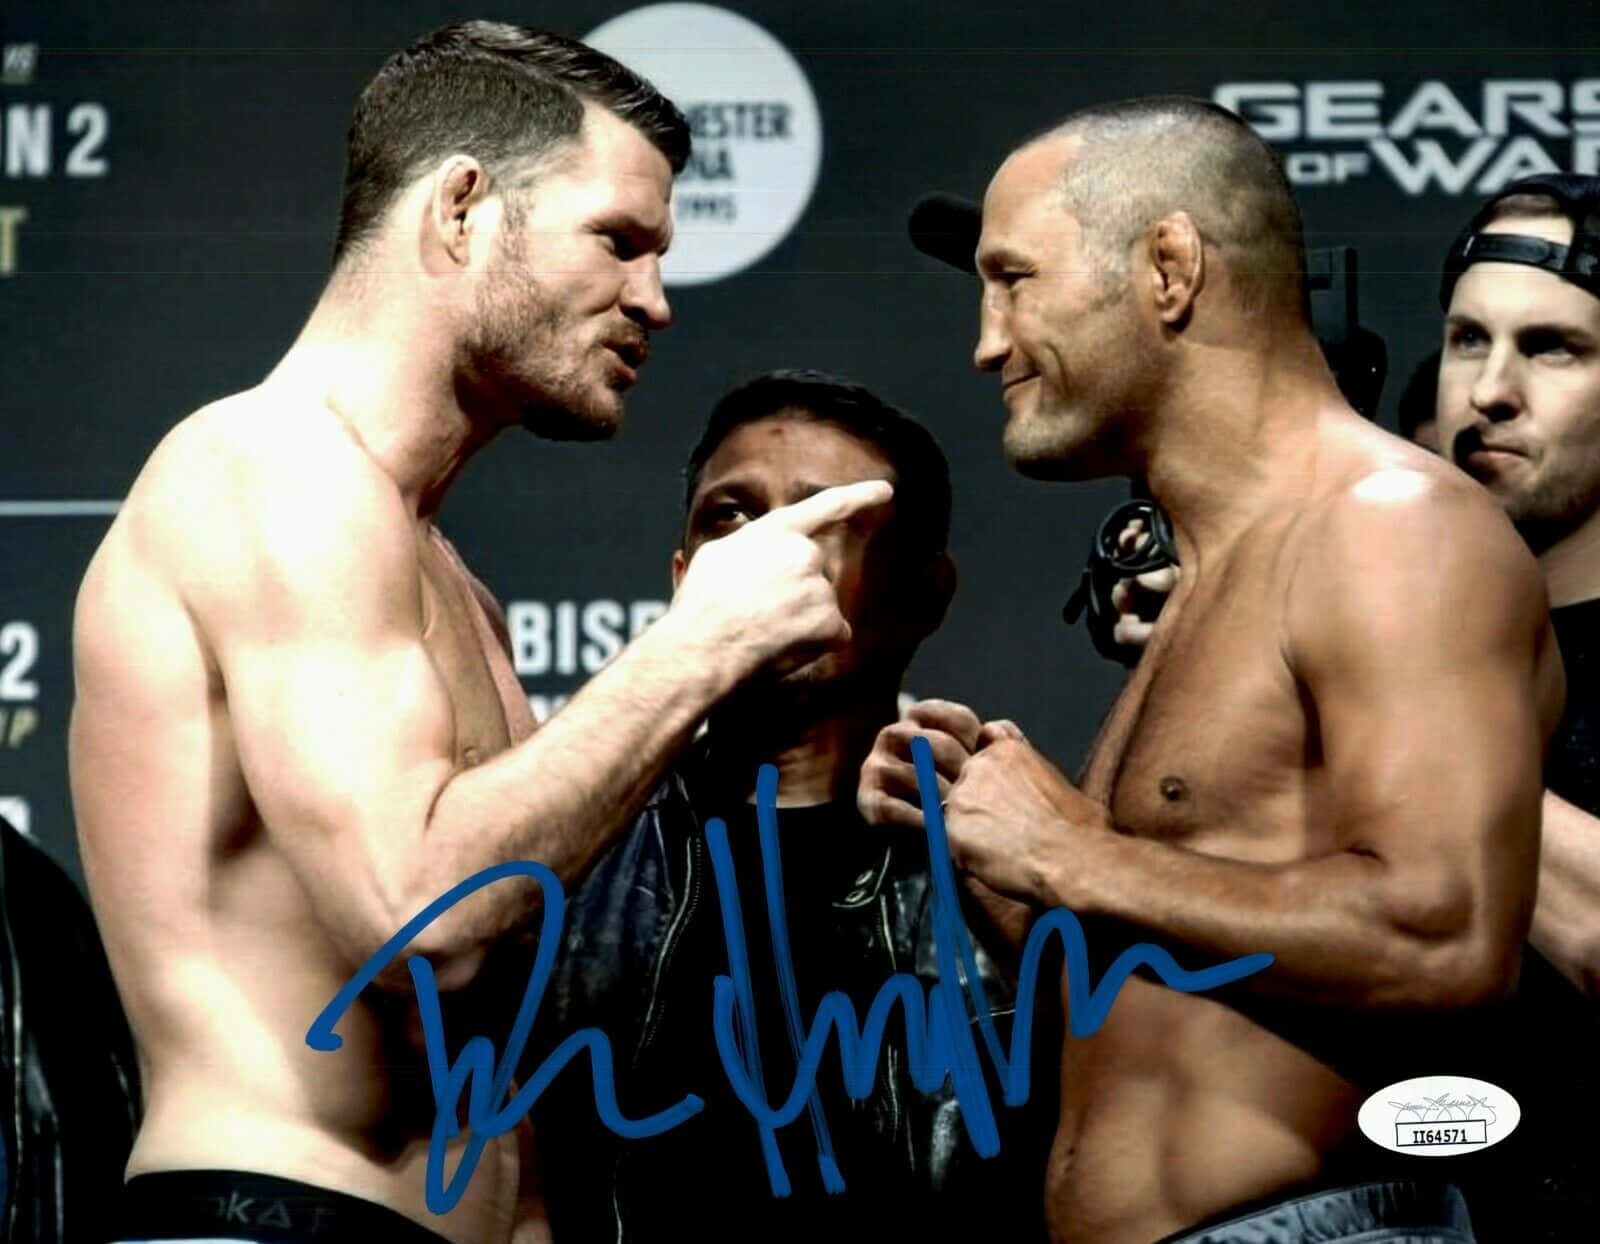 MMA Fighters Dan Henderson and Michael Bisping in Competitive Action Wallpaper